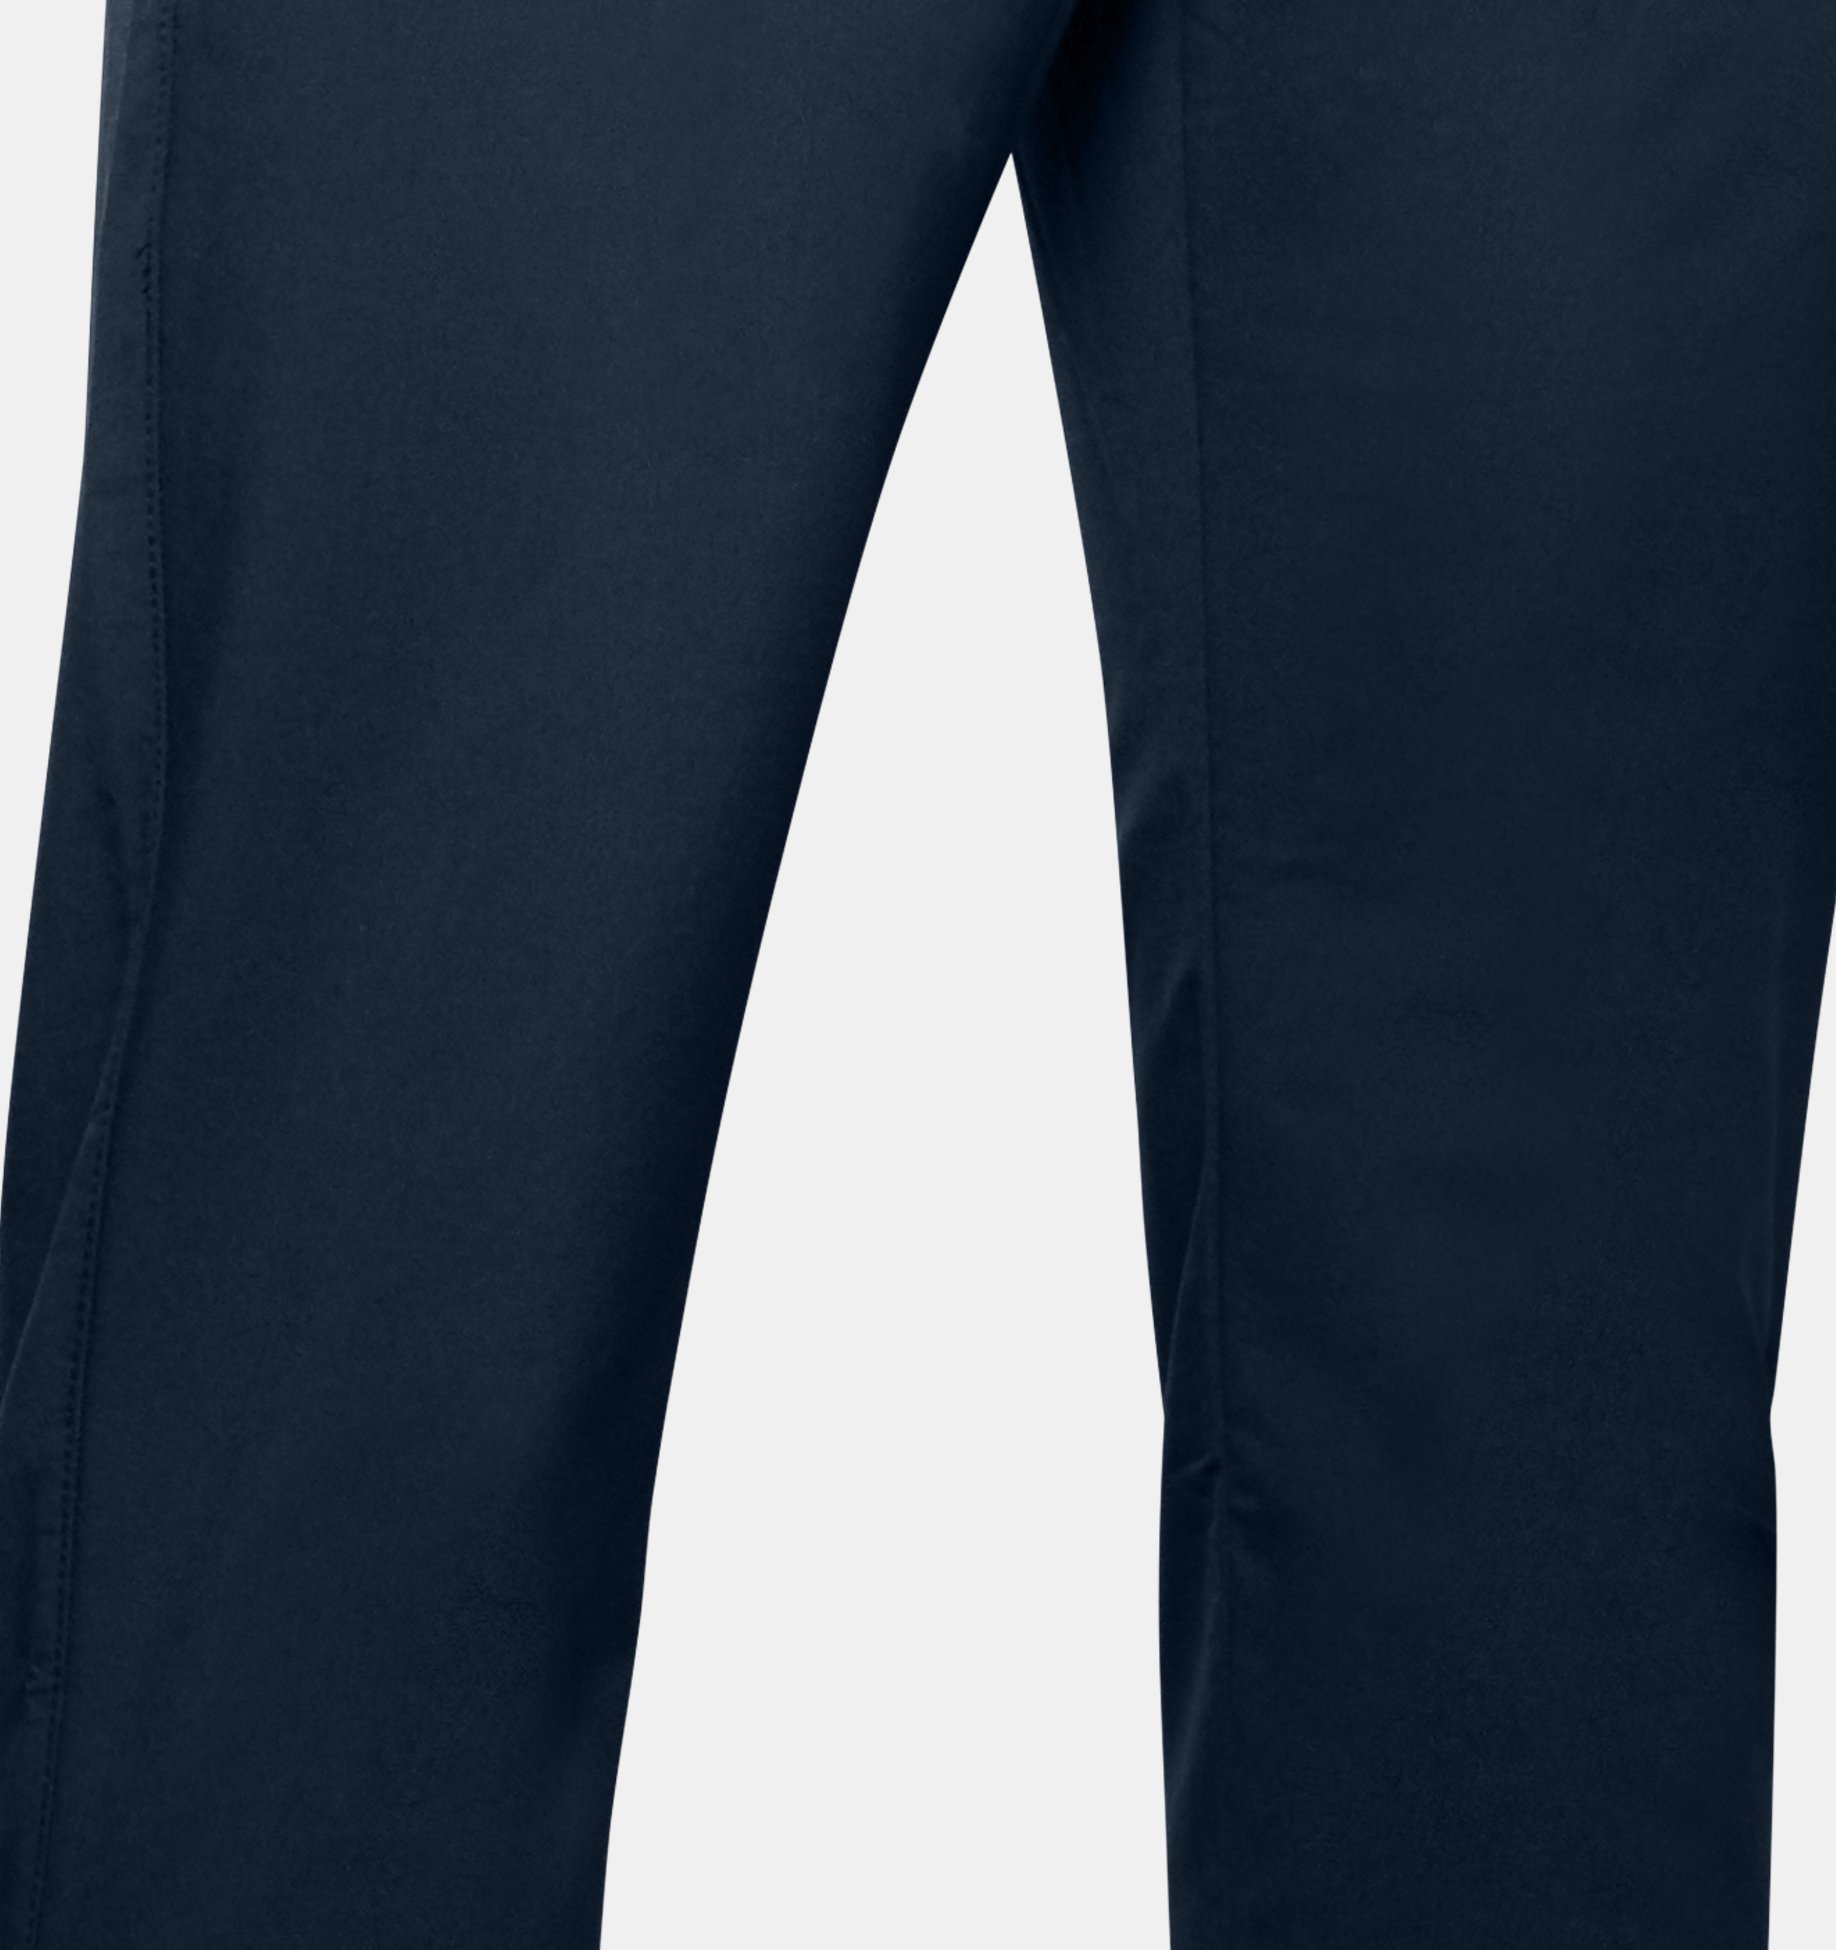 Men's UA Match Tapered Pants | Under Armour